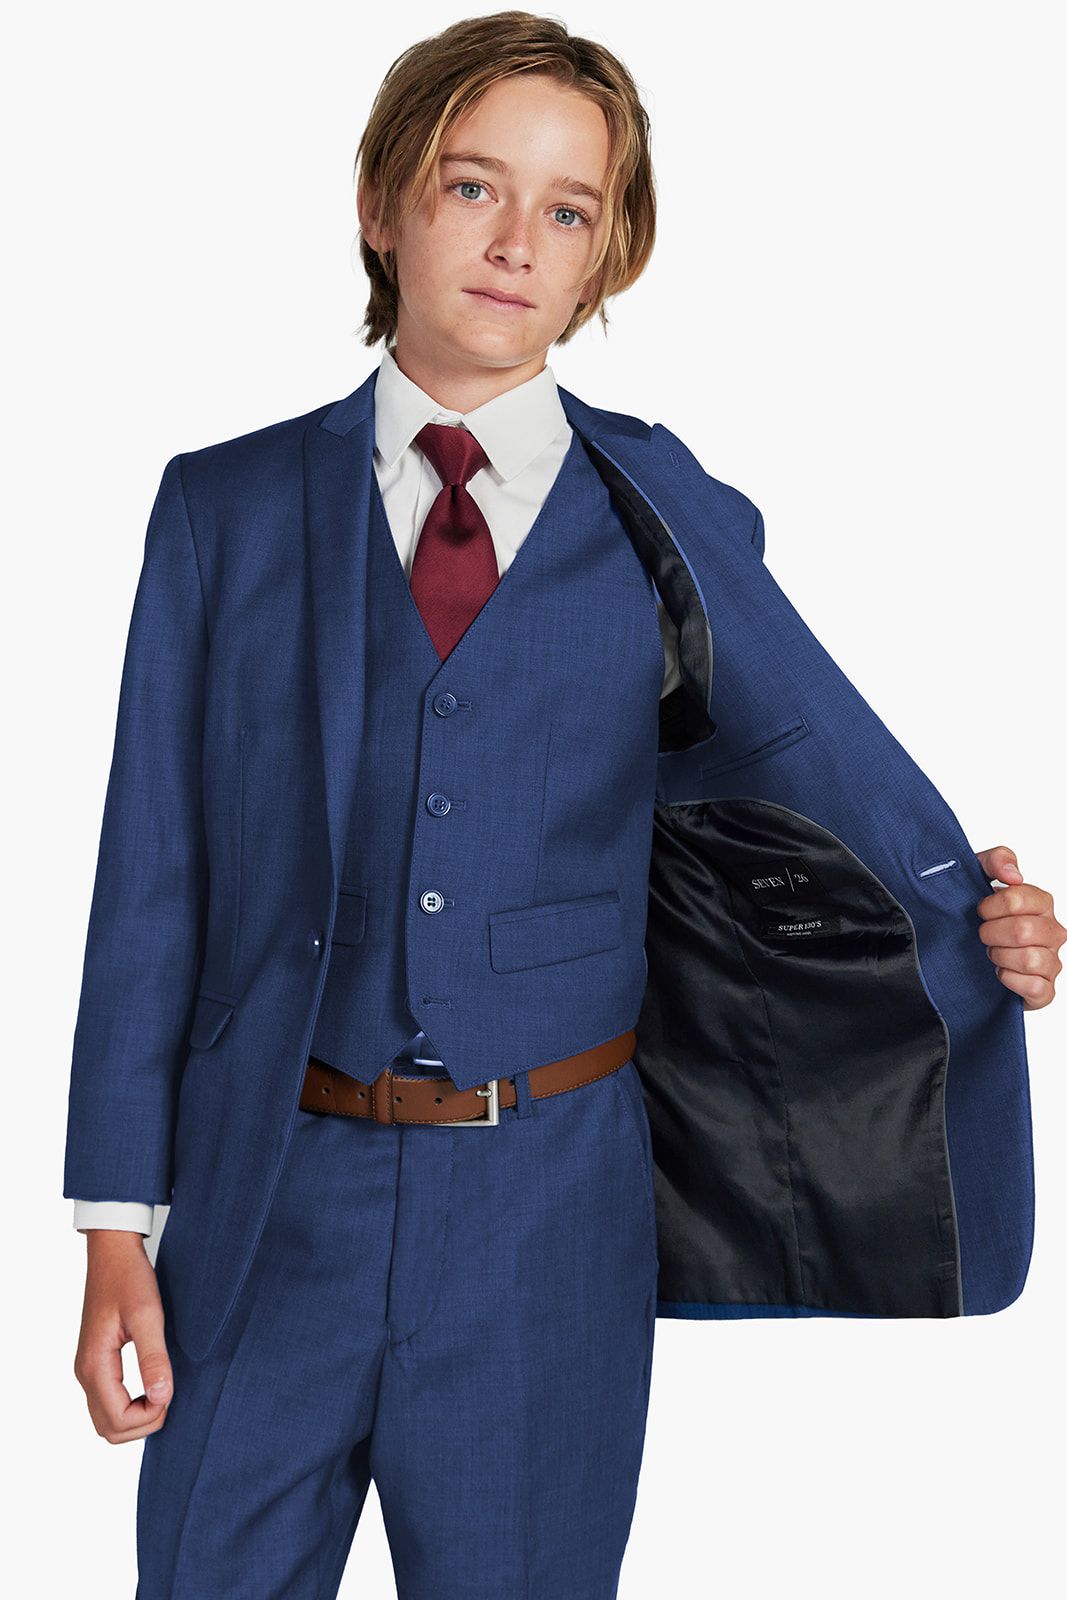 Mystic Blue Suit for kids, boys, children, and teens